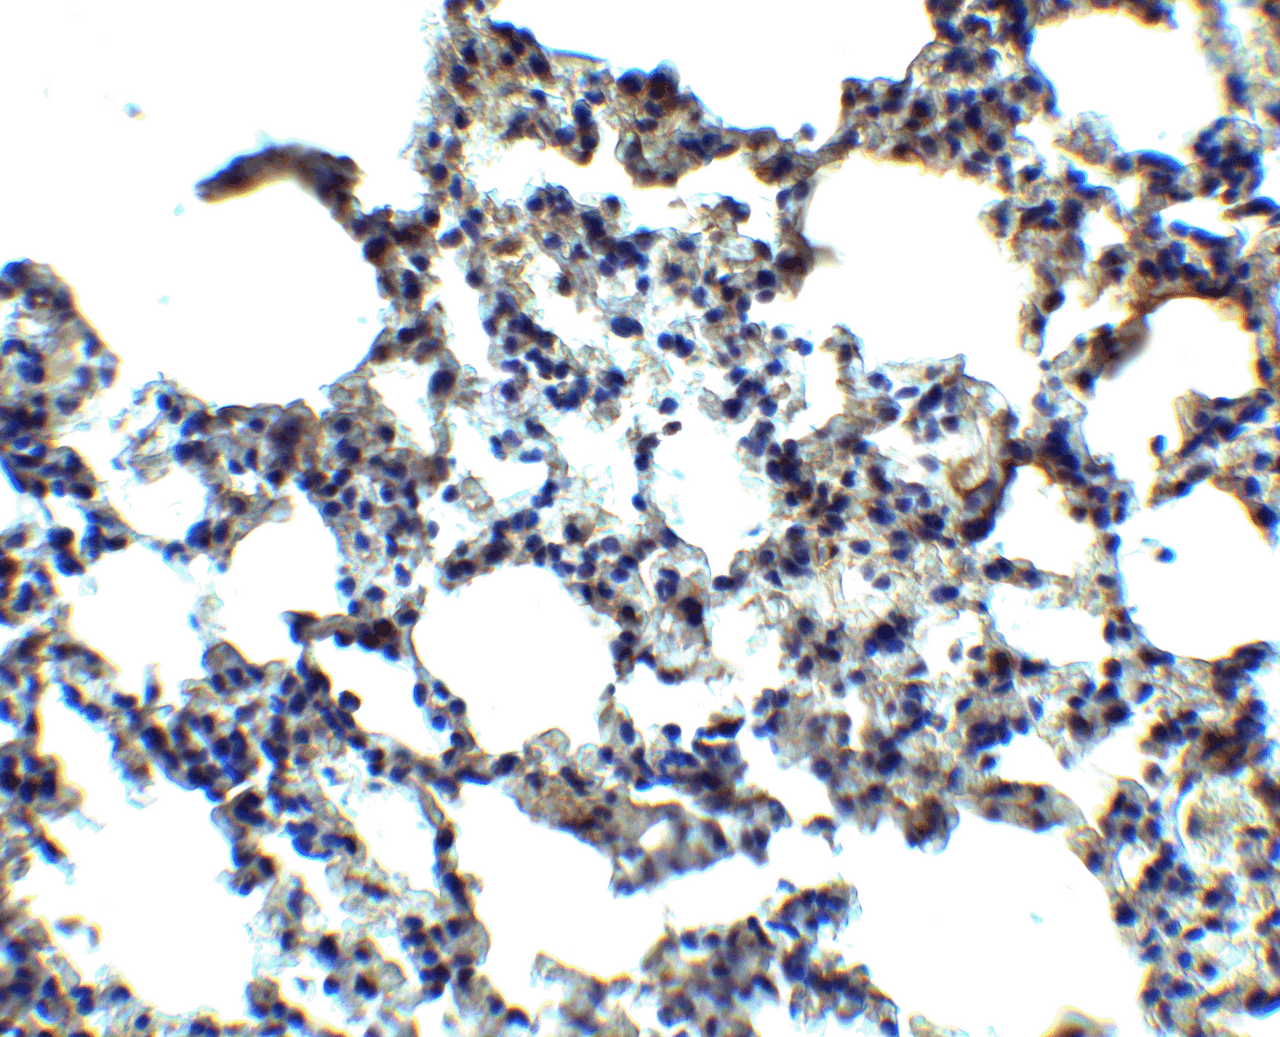 Immunohistochemistry of MFSD2A in mouse lung tissue with MFSD2A antibody at 2.5 ug/ml.